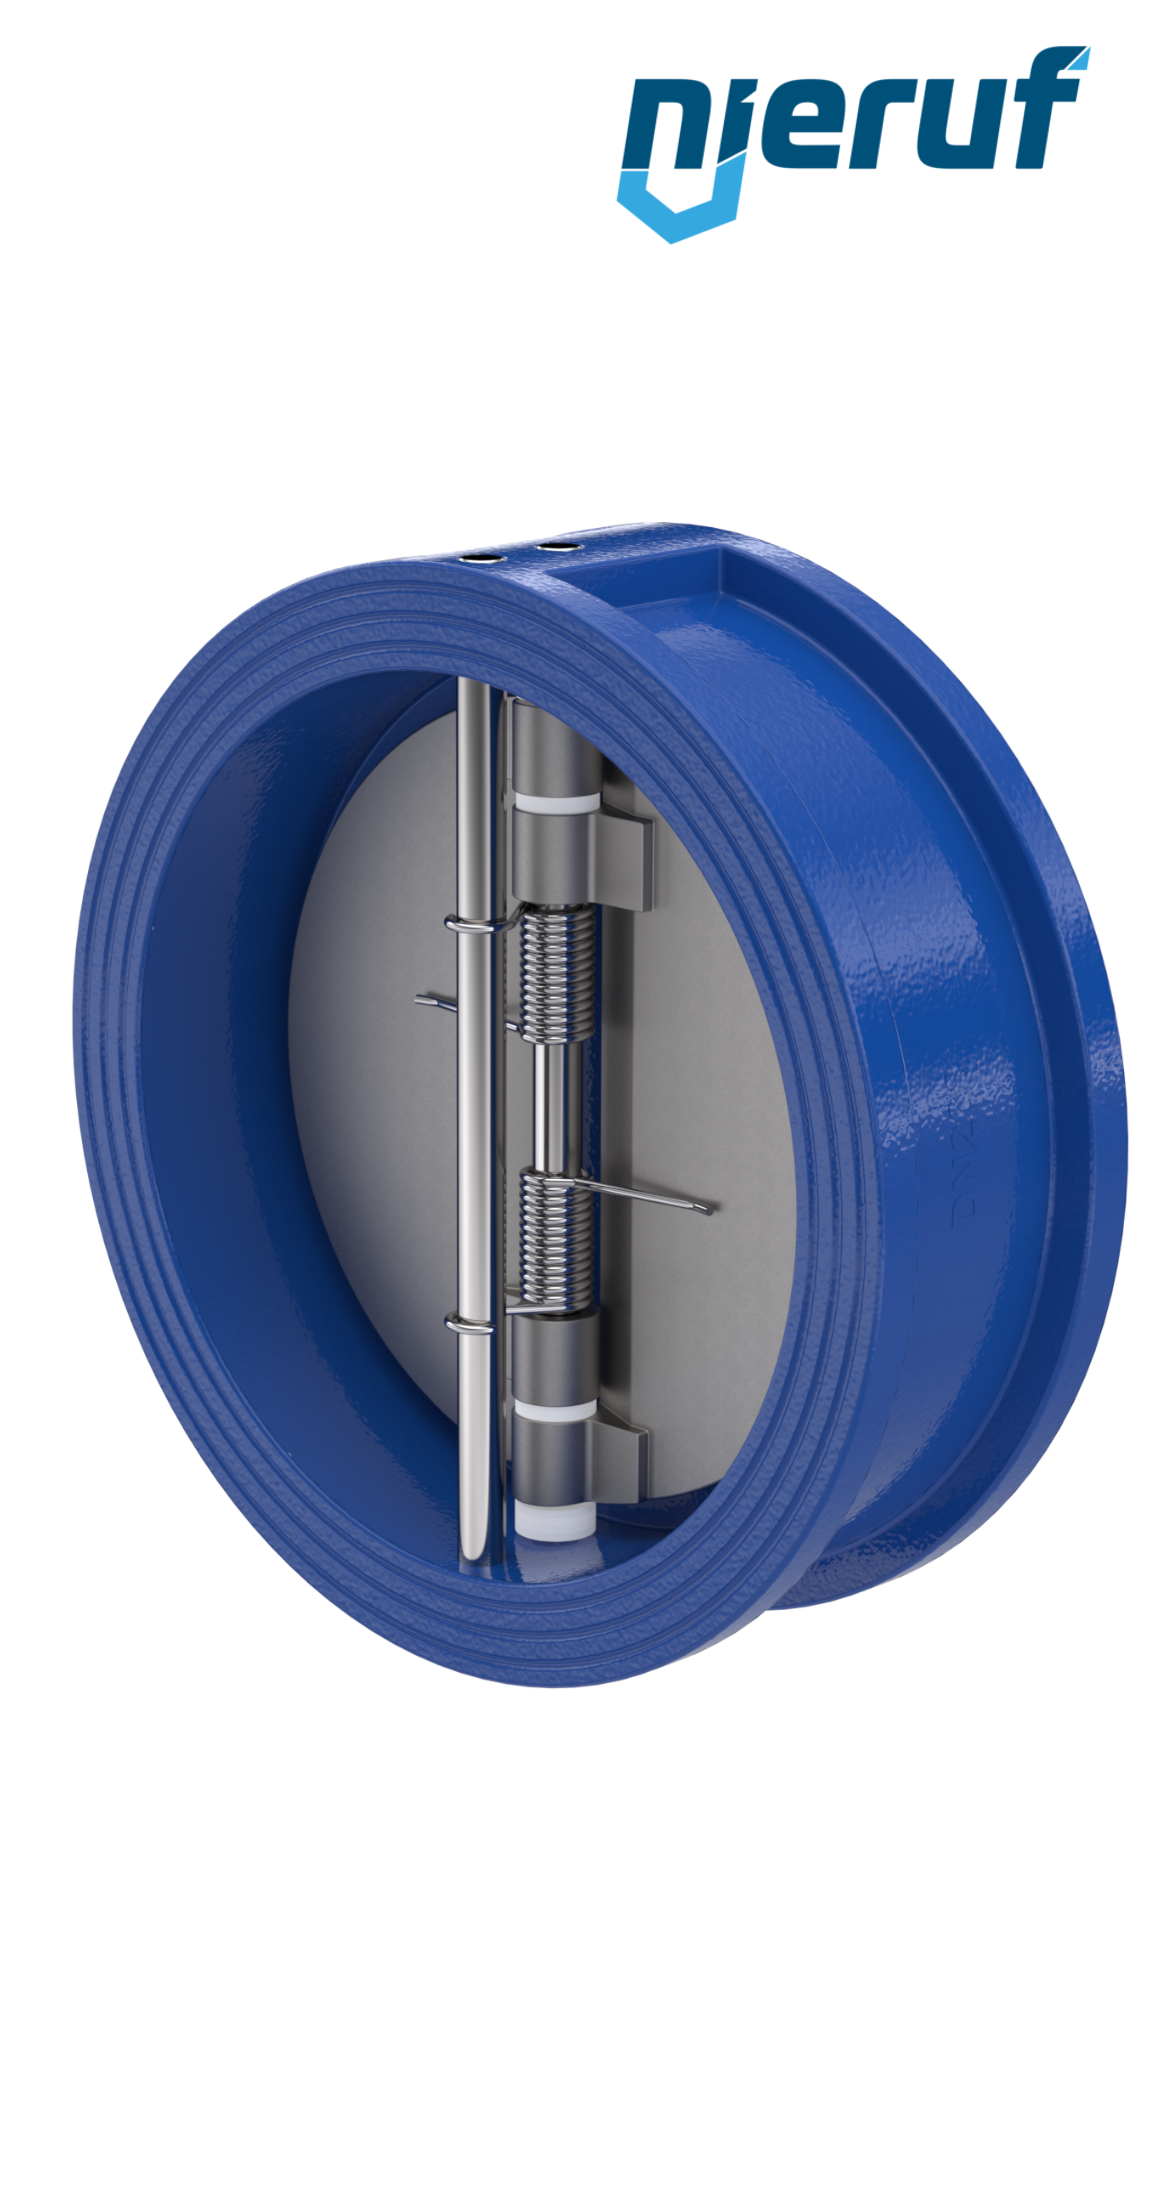 dual plate check valve DN200 DR02 GGG40 epoxyd plated blue 180µm EPDM